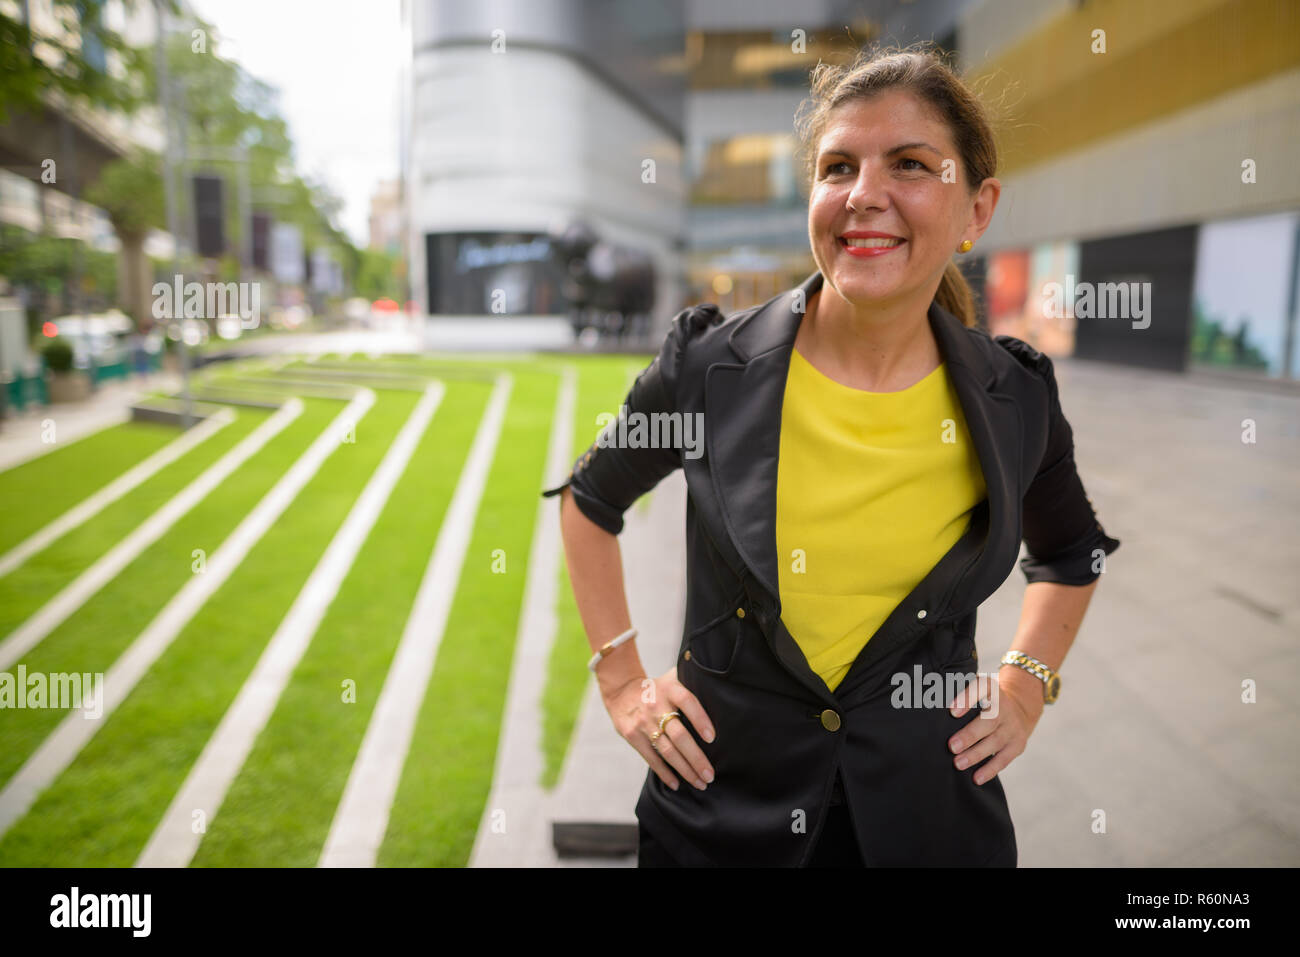 Portrait of happy young woman smiling outdoors Banque D'Images